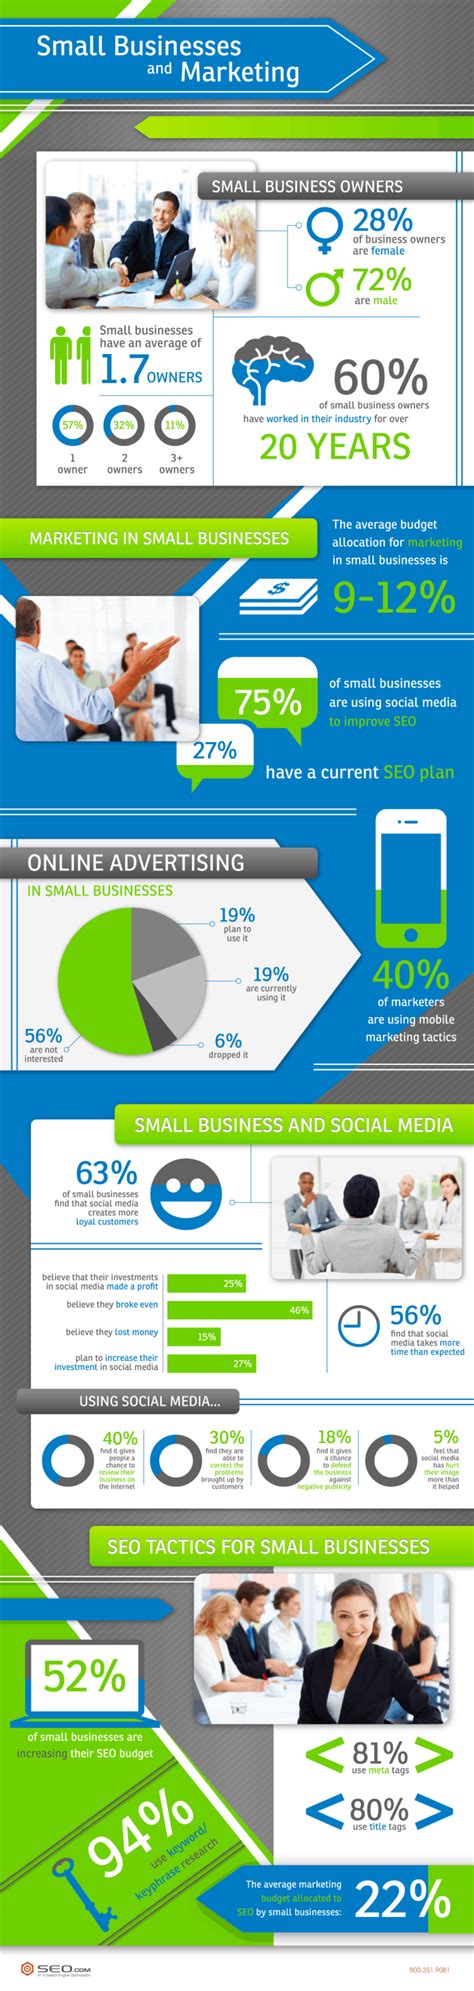 Small Business Marketing For 2014 Infographic Wikimotive Llc